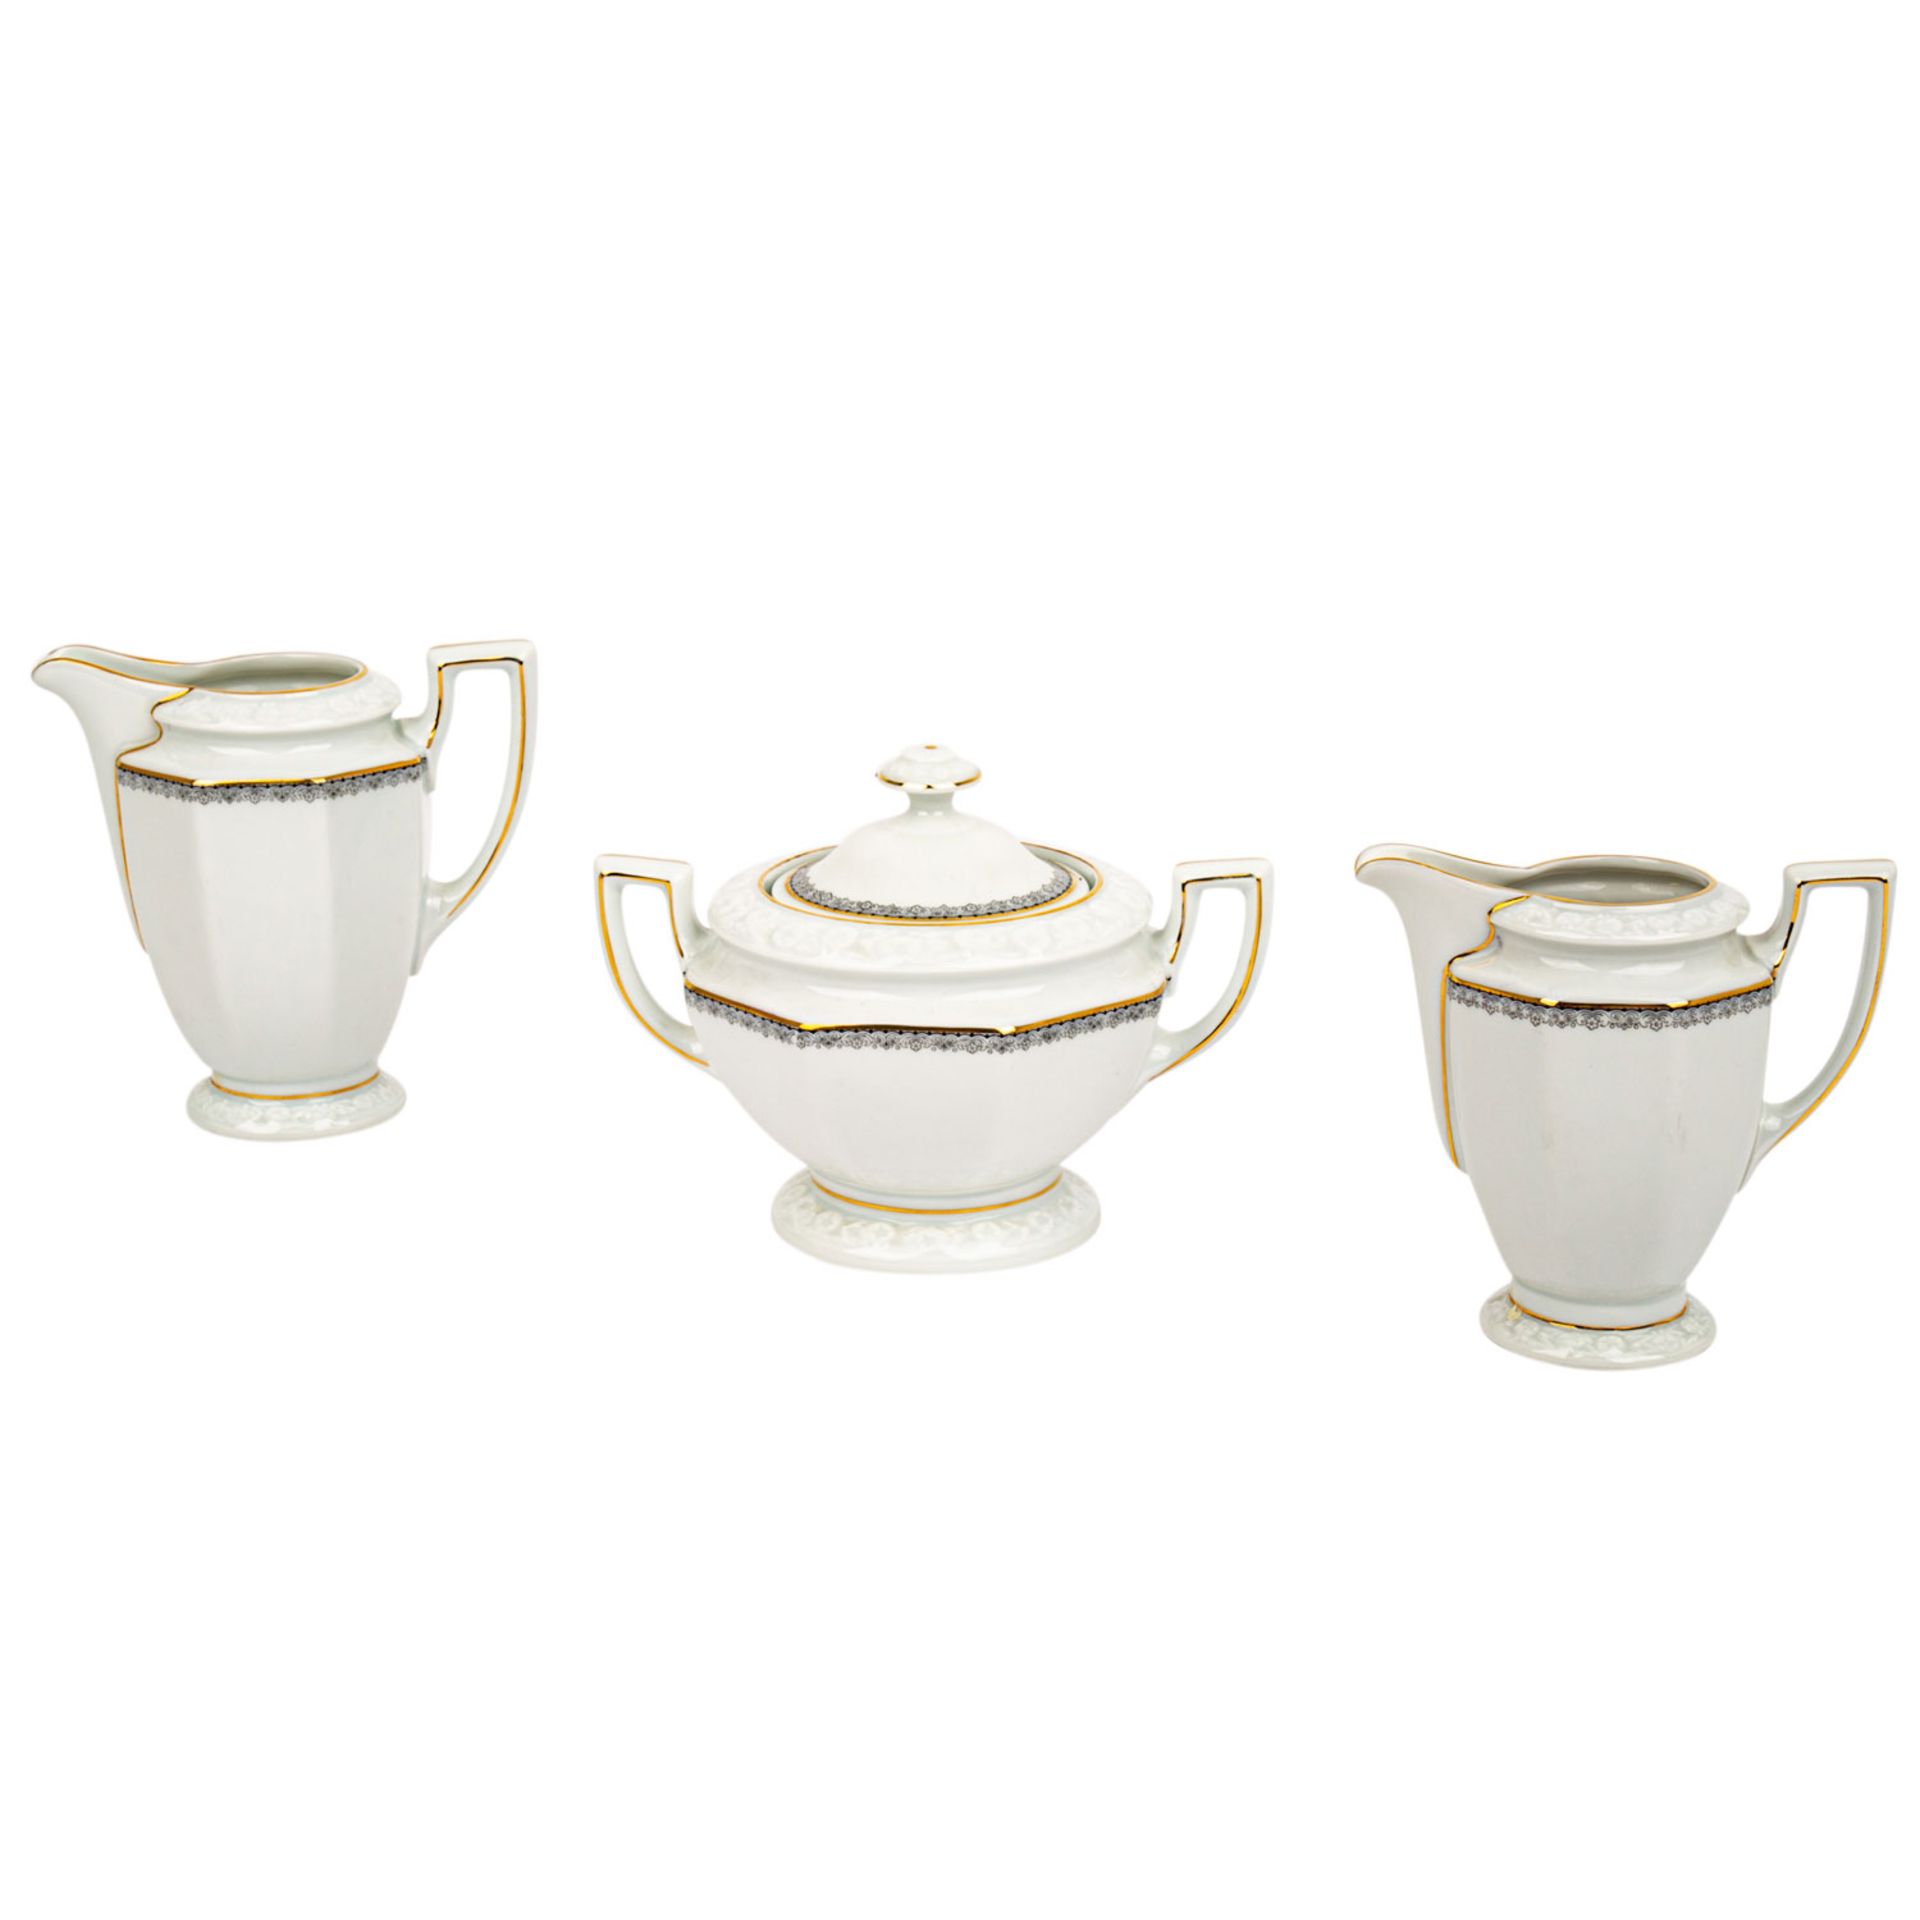 ROSENTHAL Kaffeeservice f. 7-11 Personen 'Maria', 1. Hälfte 20. Jhd.. - Image 3 of 5